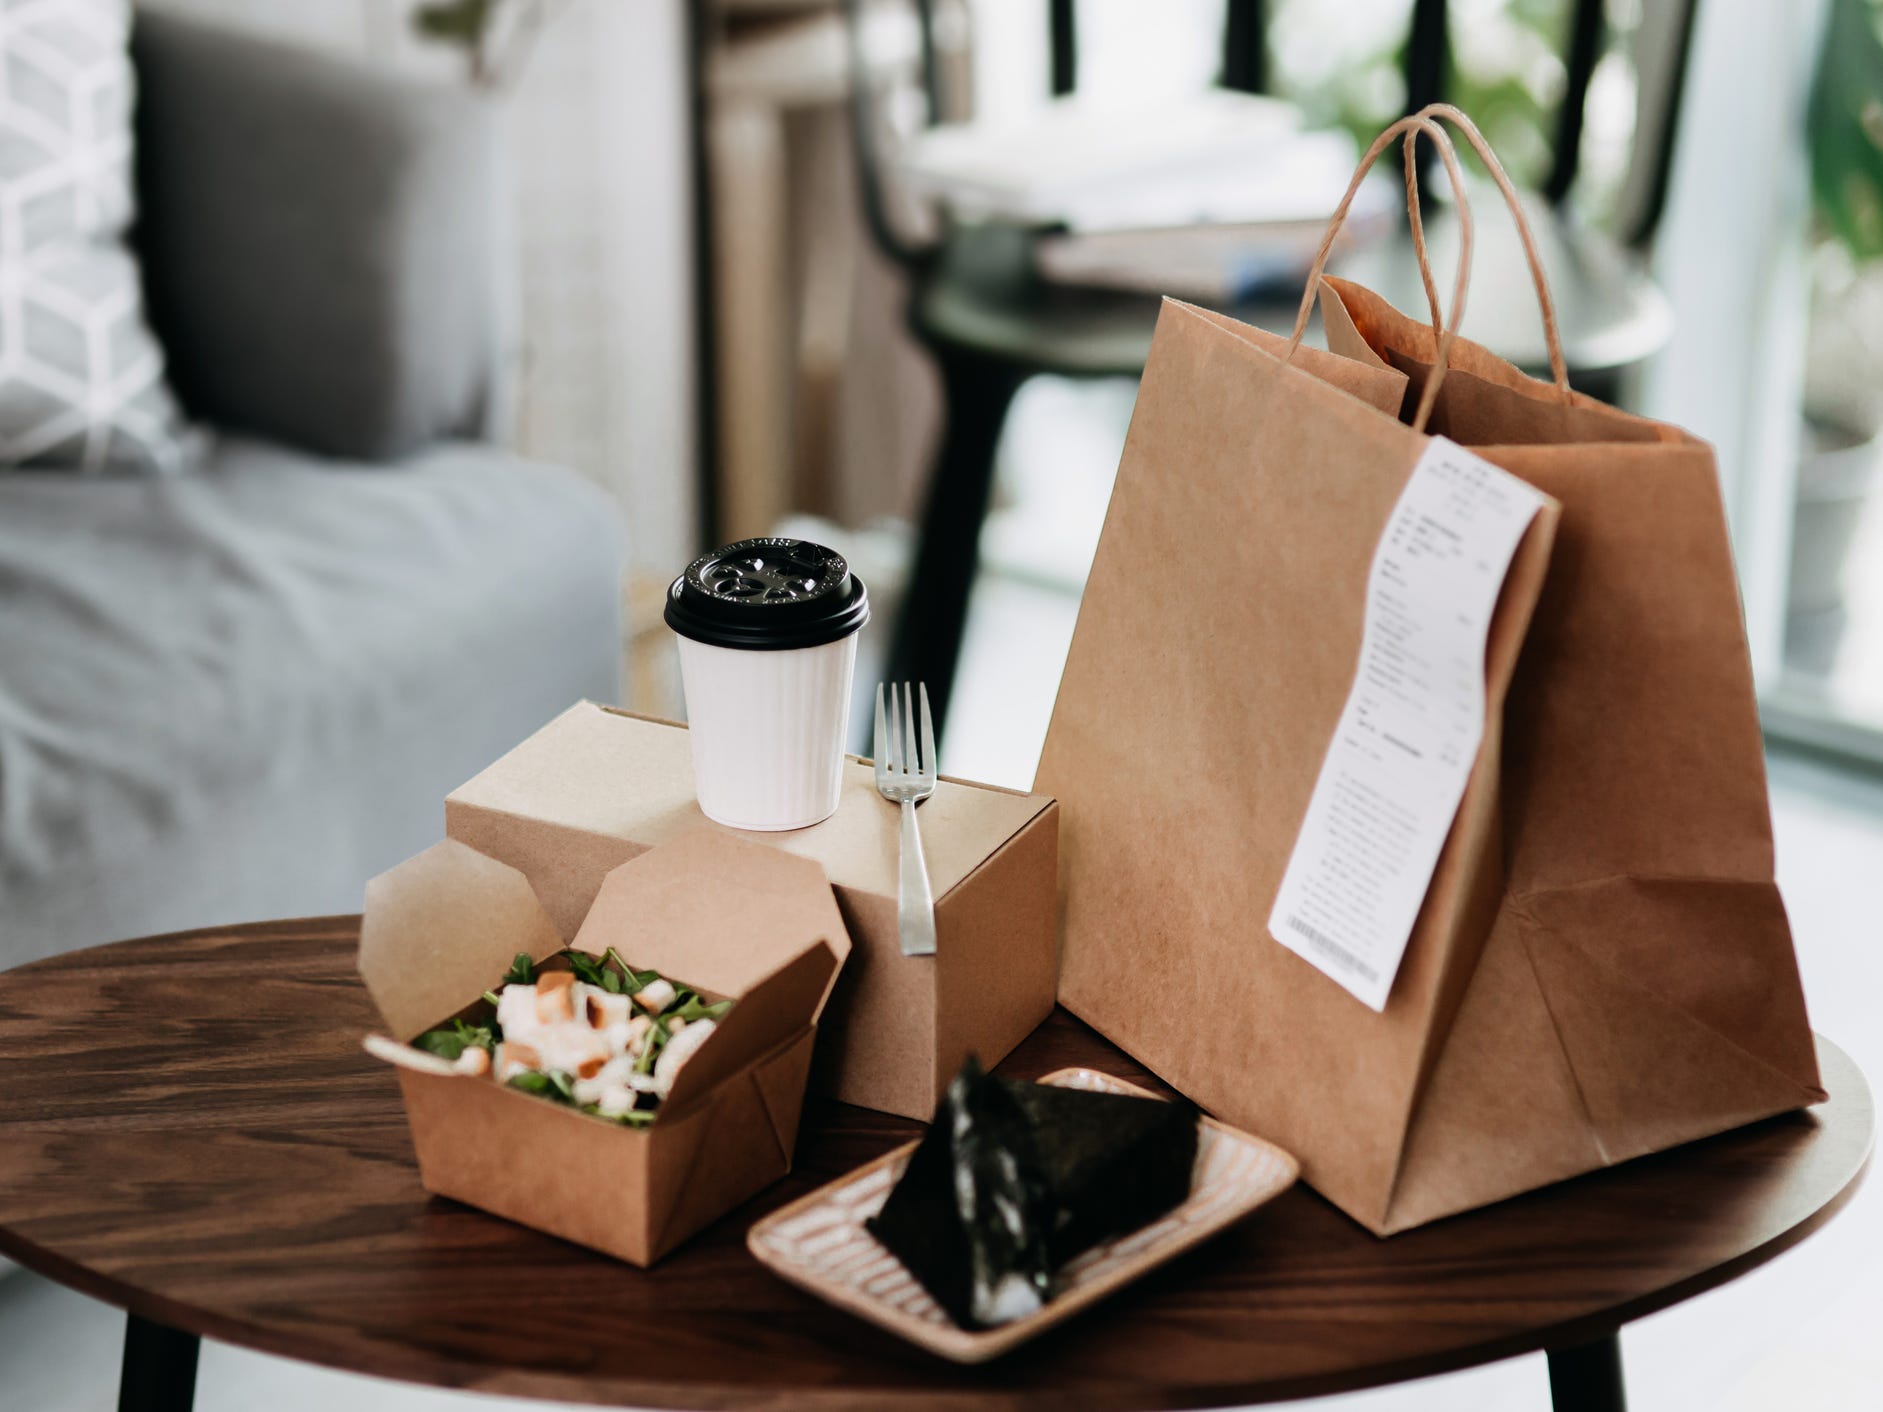 Takeout containers and bag on a round table